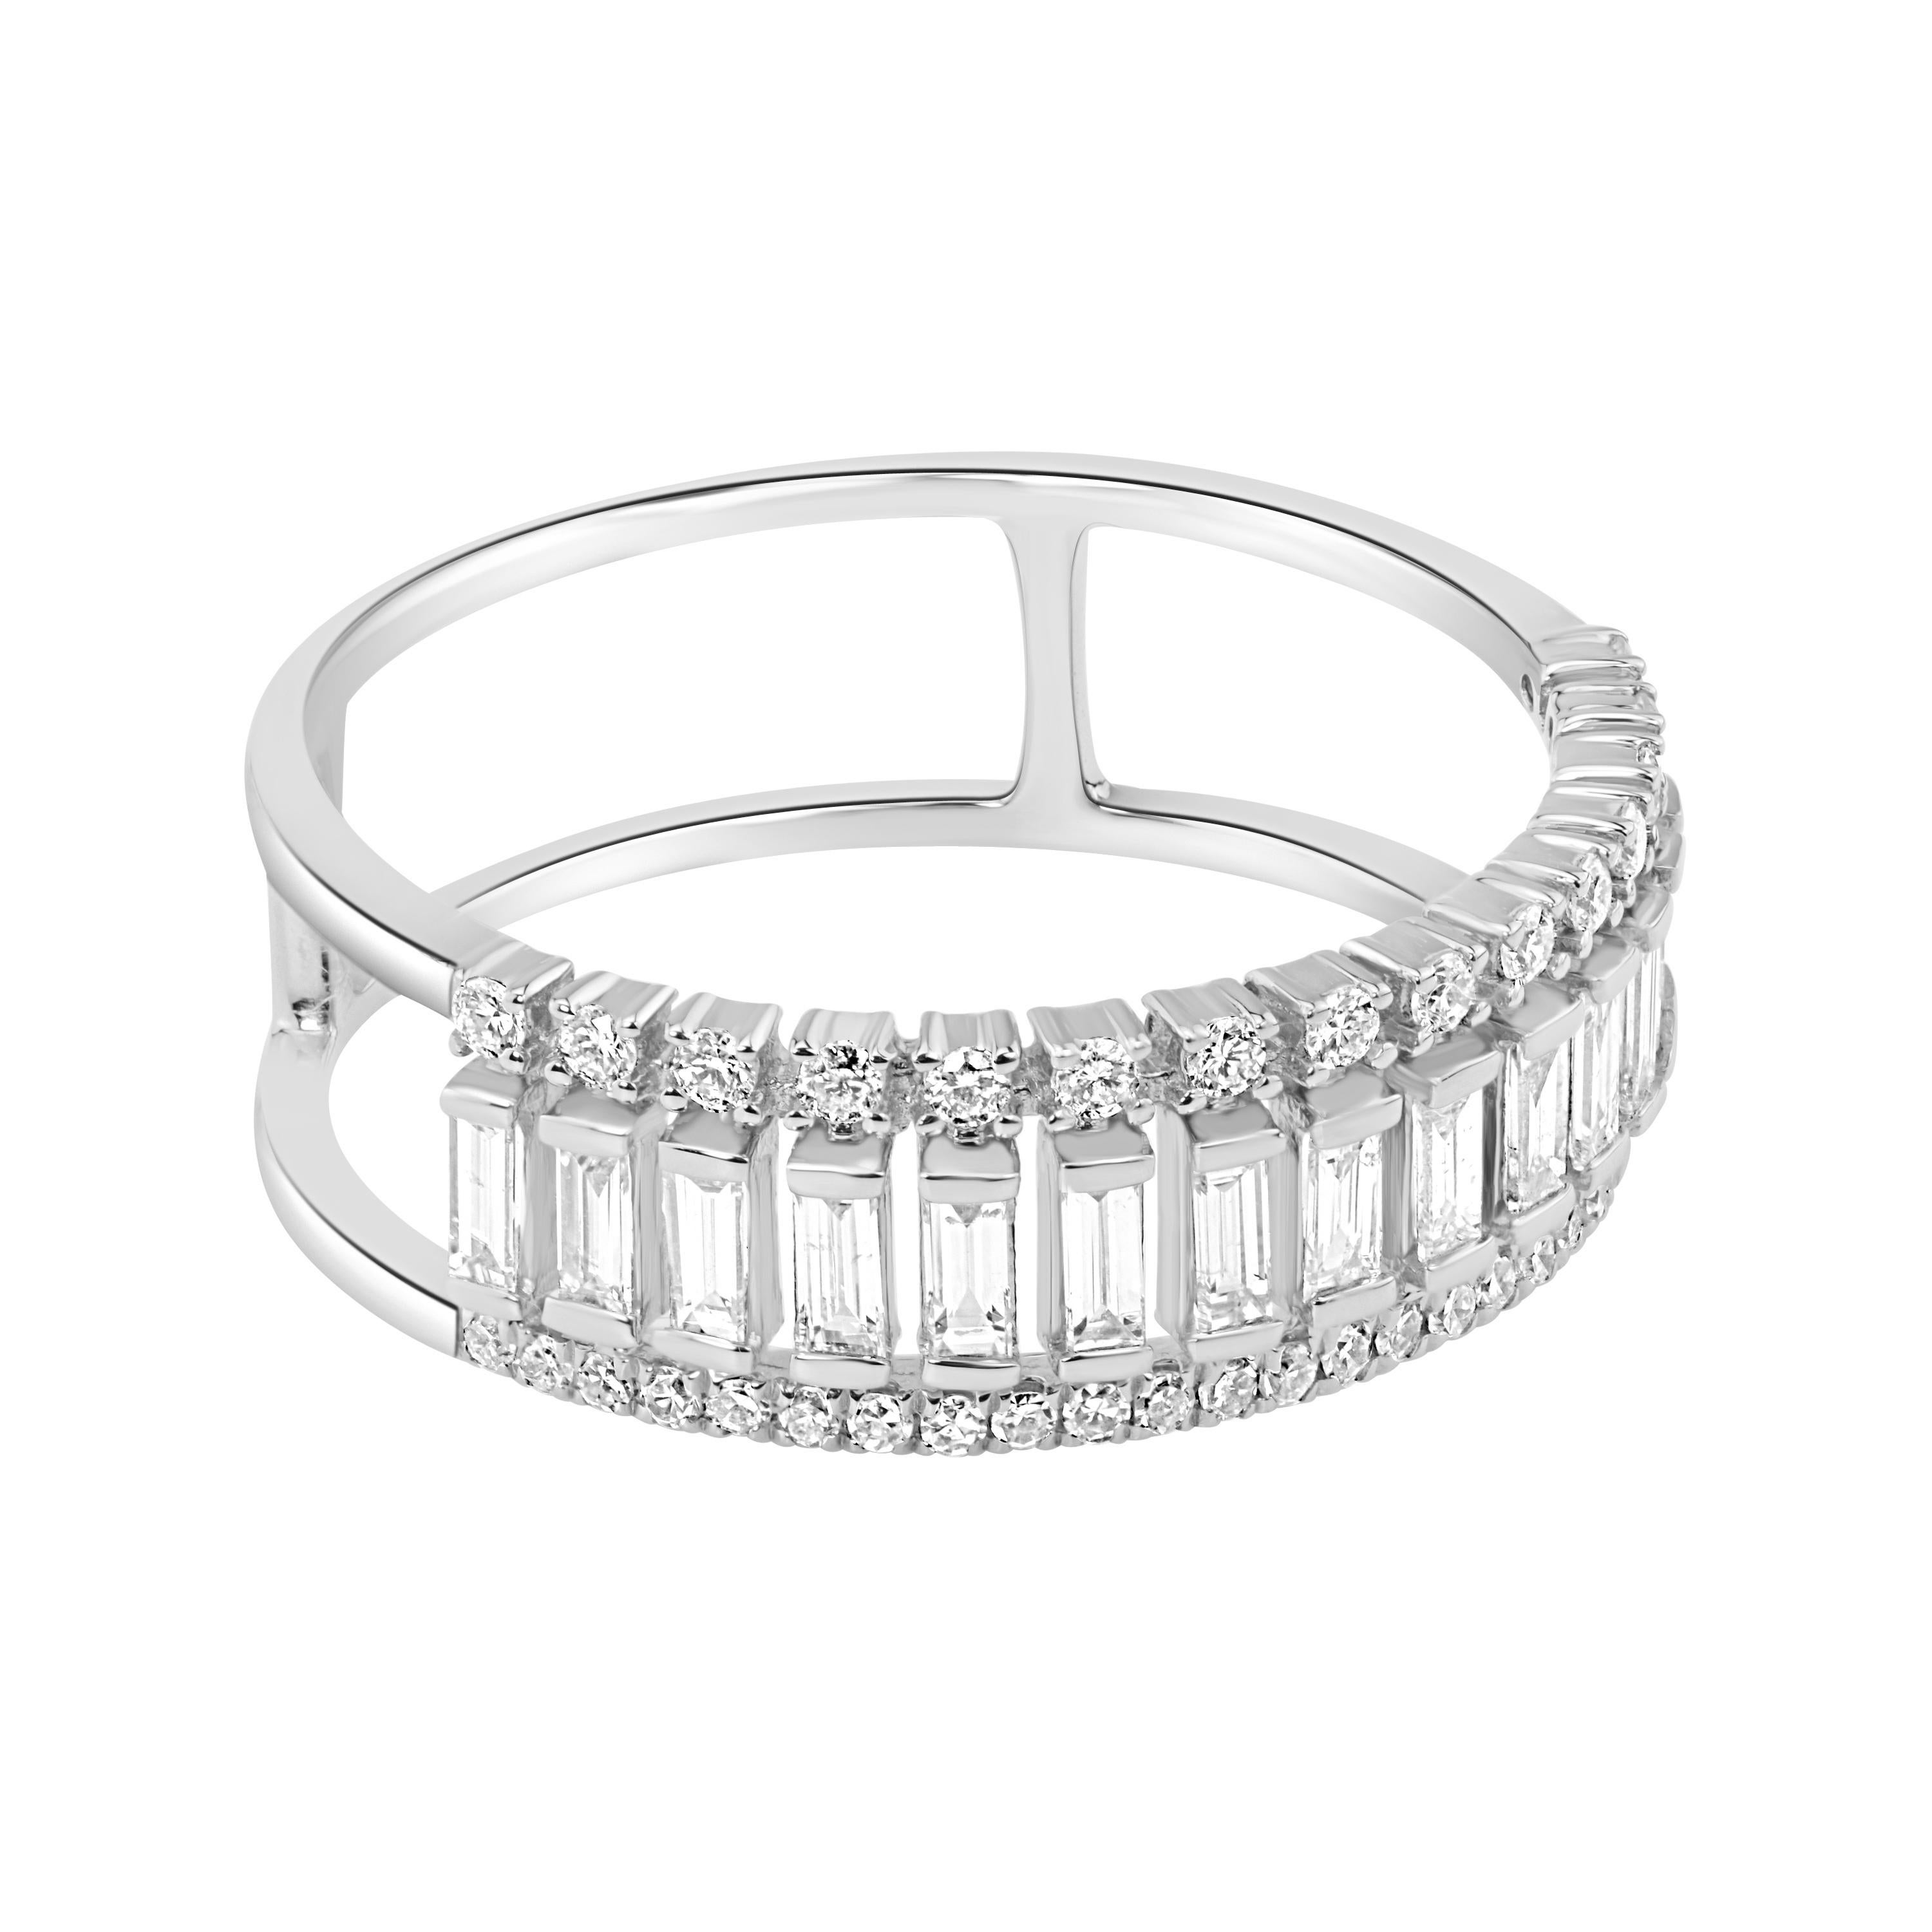 Luxle 0.56cttw Baguette and Round Diamond Band Ring in 18k White Gold In New Condition For Sale In New York, NY